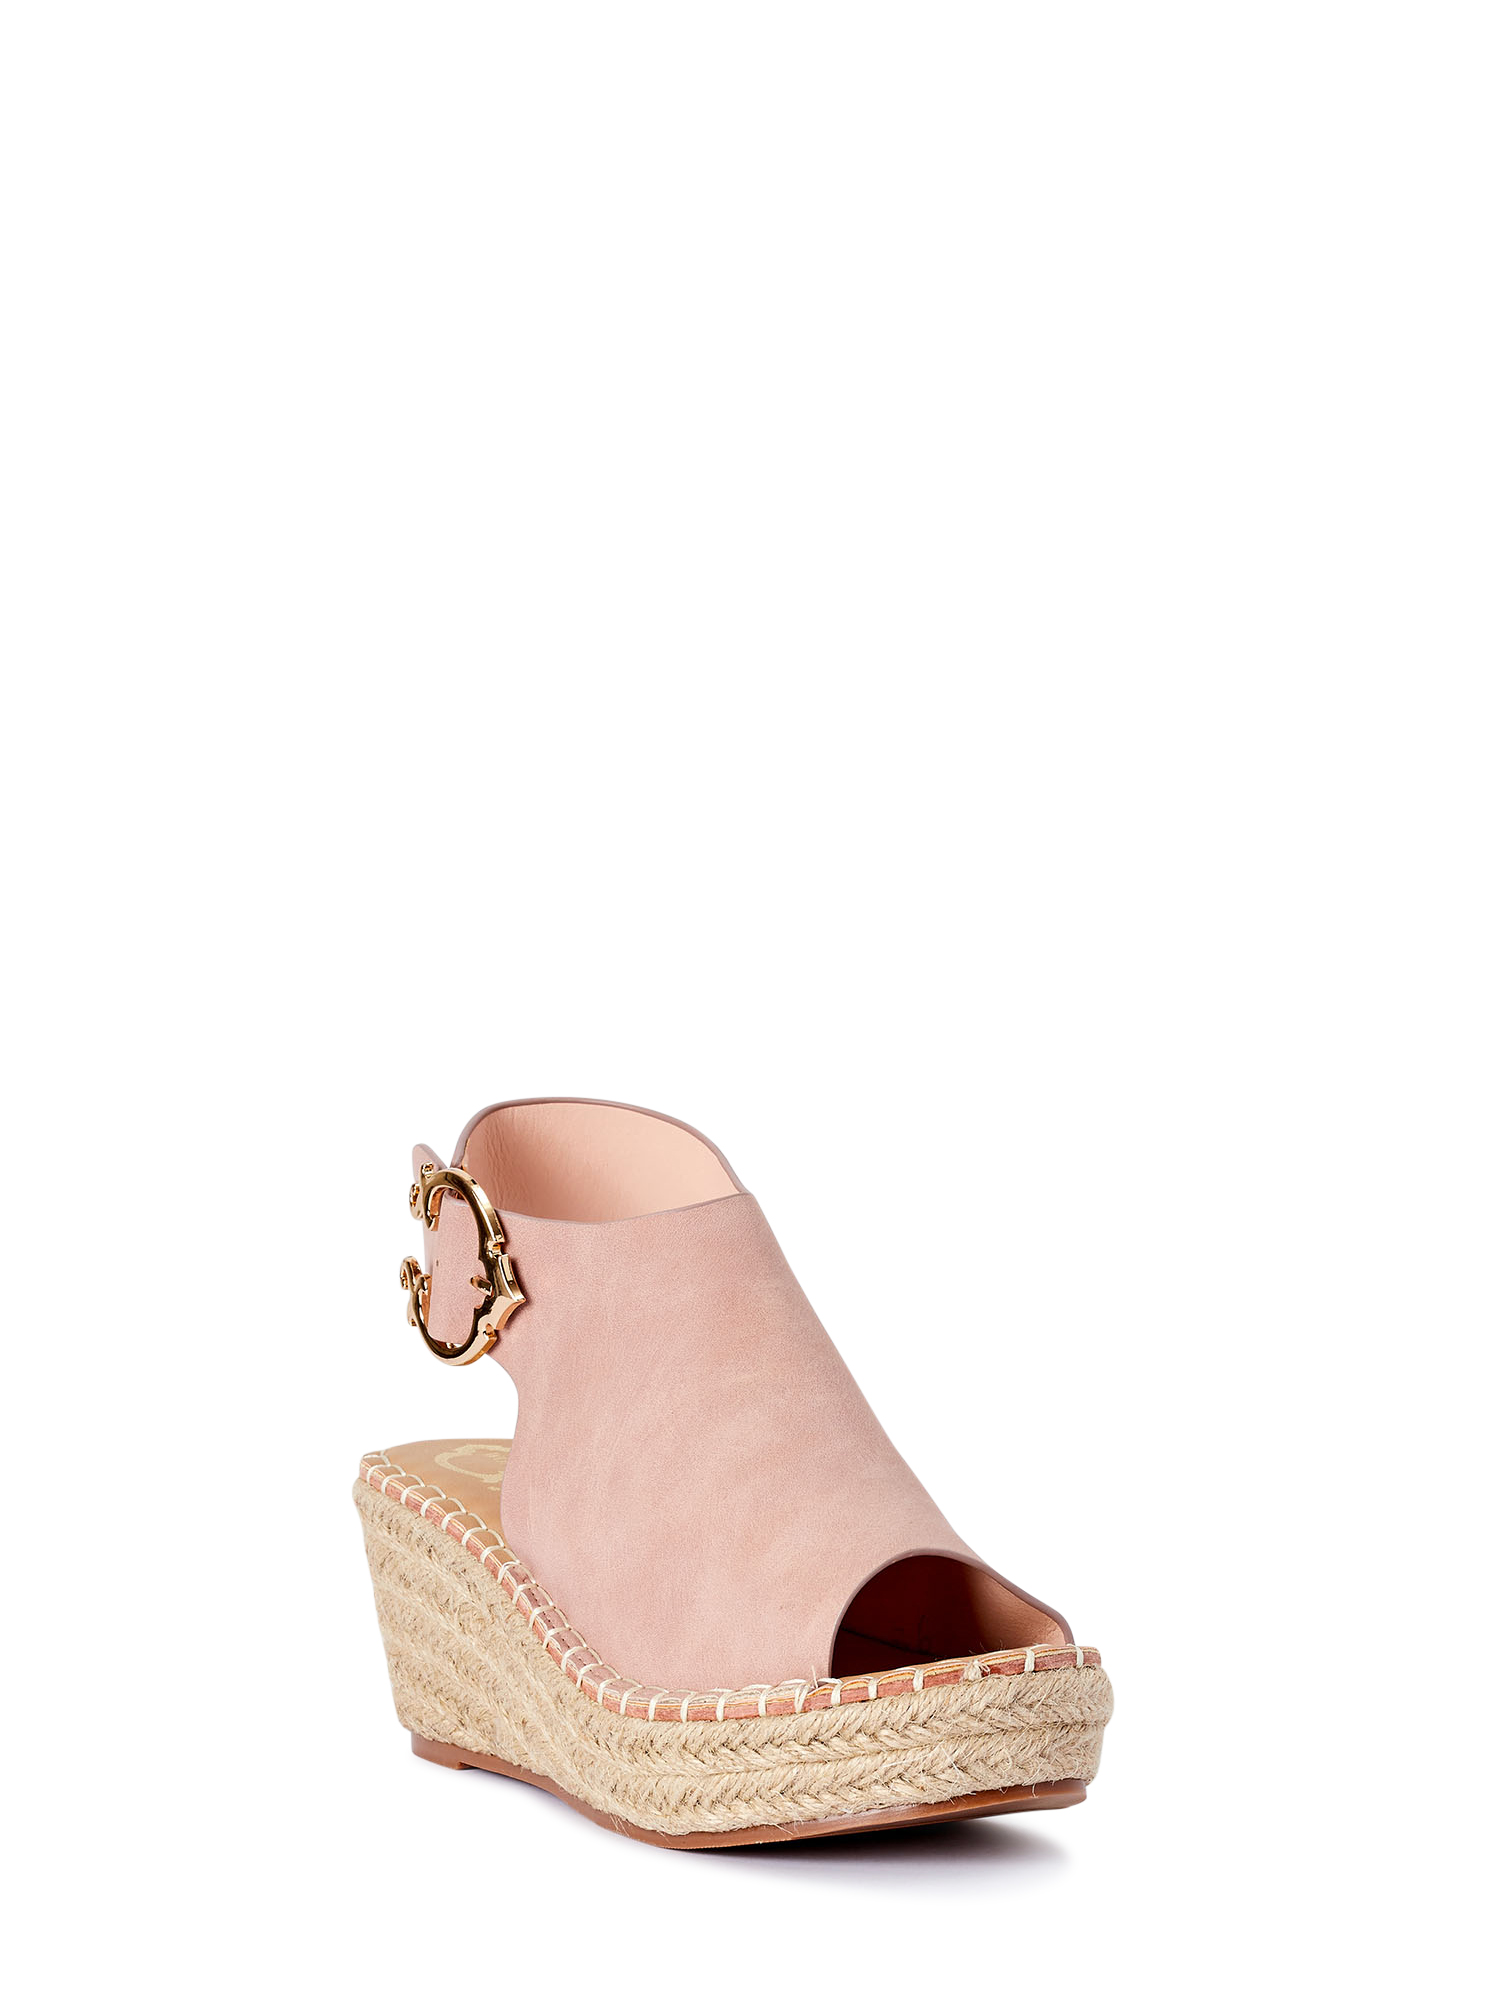 Womens Chic Chain Wedge Sandals Espadrille Briaded